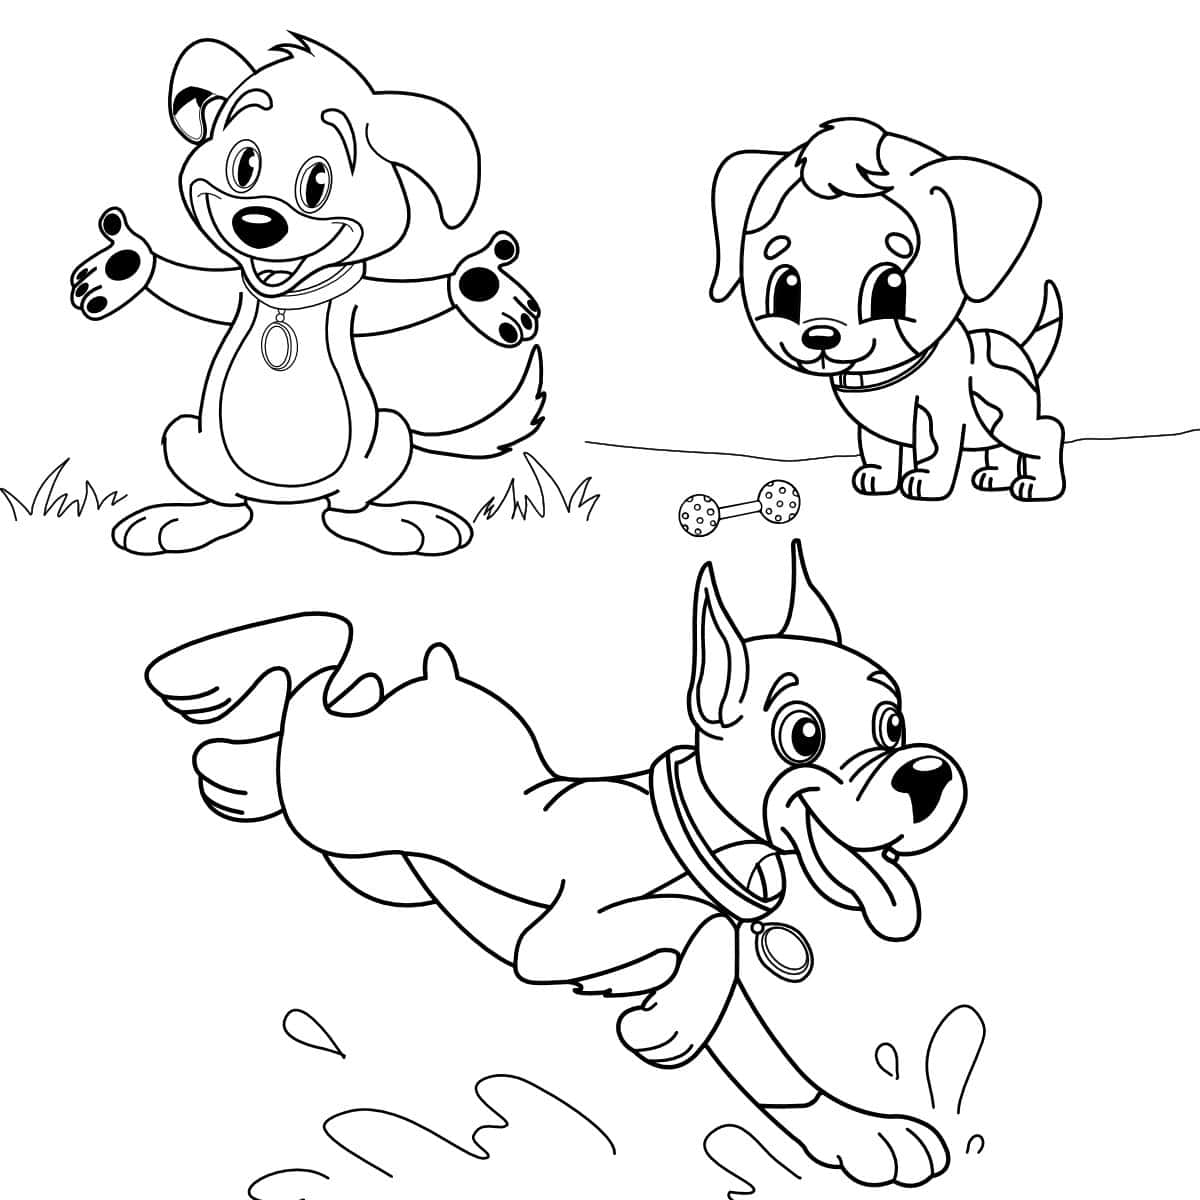 Cute puppy coloring pages for free